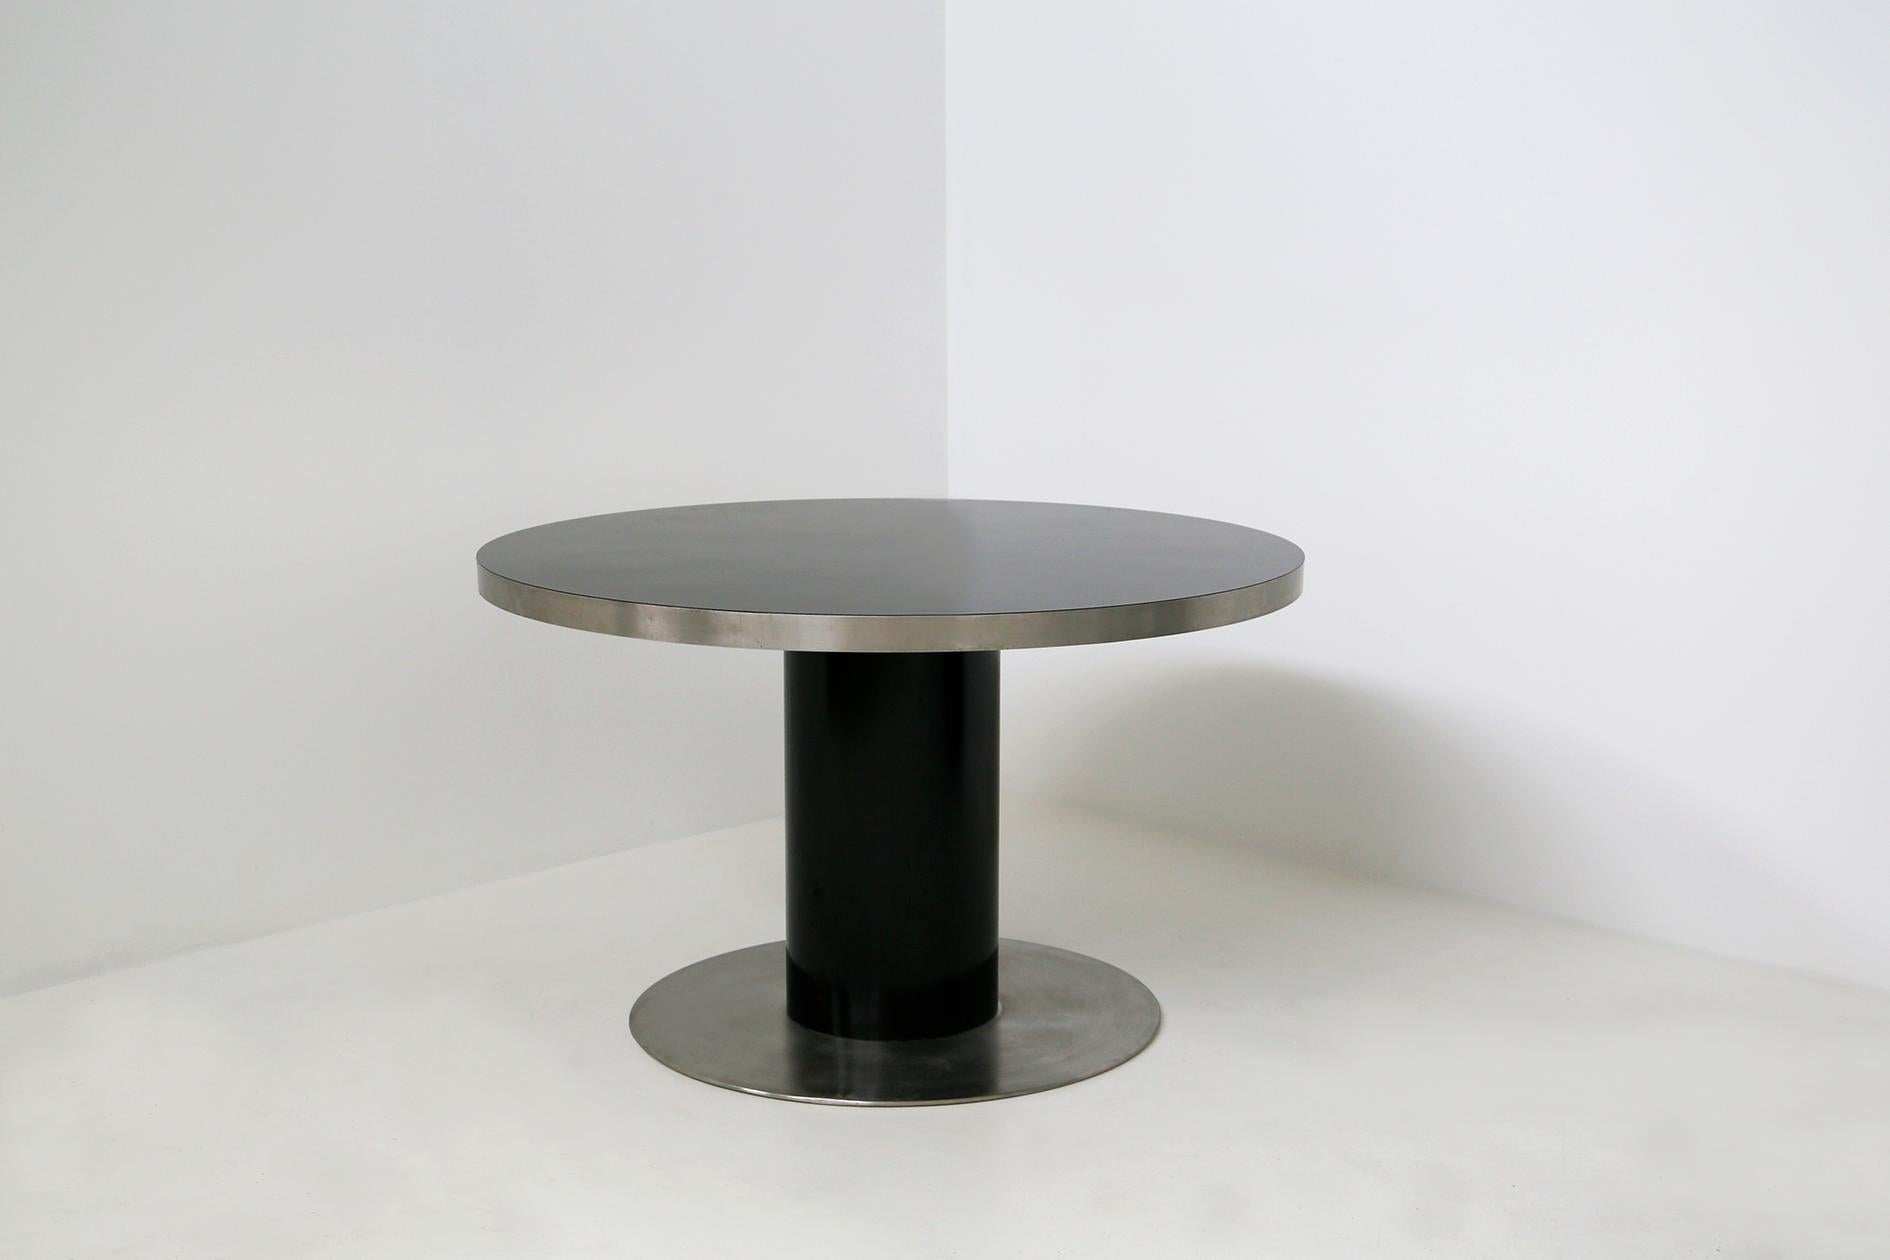 Pedestal by Willy Rizzo Dining table in wood and steel: the surface has an elegant polished black laminate top framed by a 5 cm thick steel band. The pedestal is in black laminate like its top which rests on a thick round steel plate. The base has a